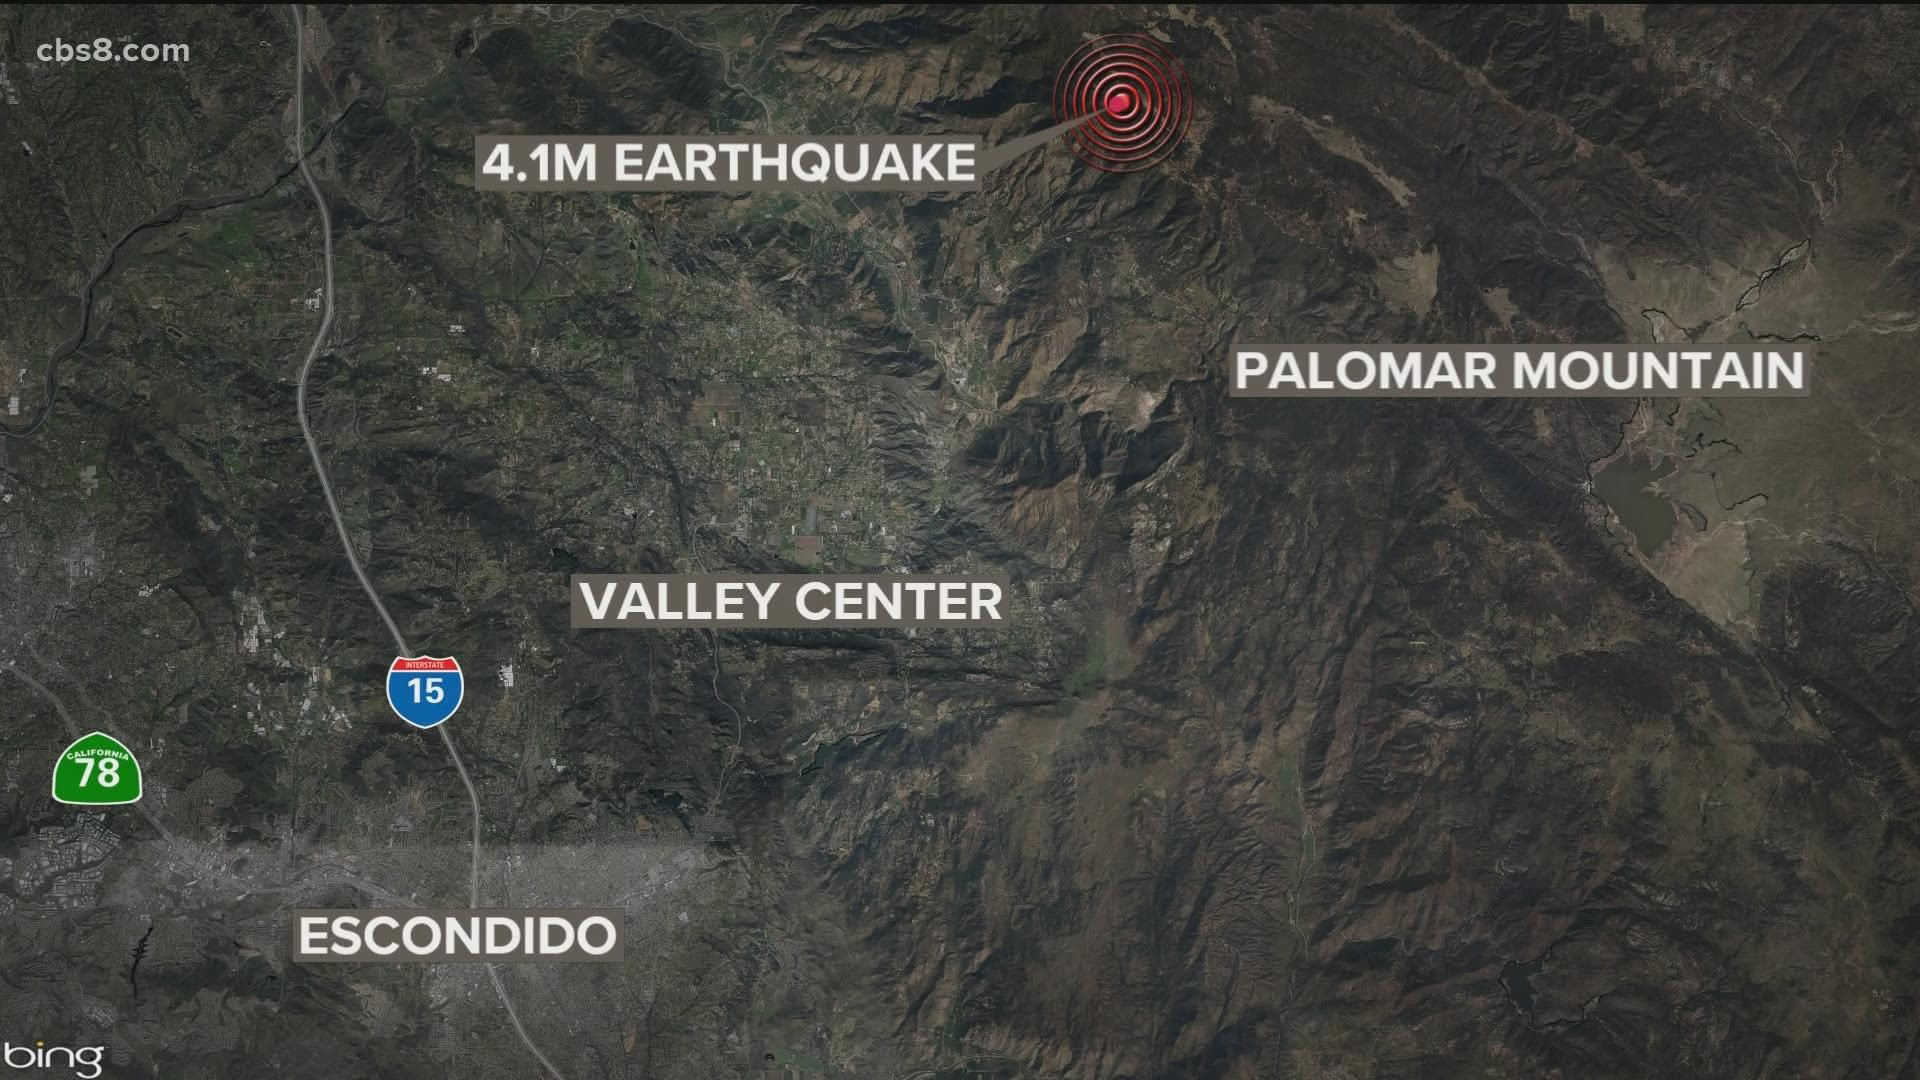 USGS reported a 4.0 magnitude earthquake near the Palomar Observatory Sunday morning.